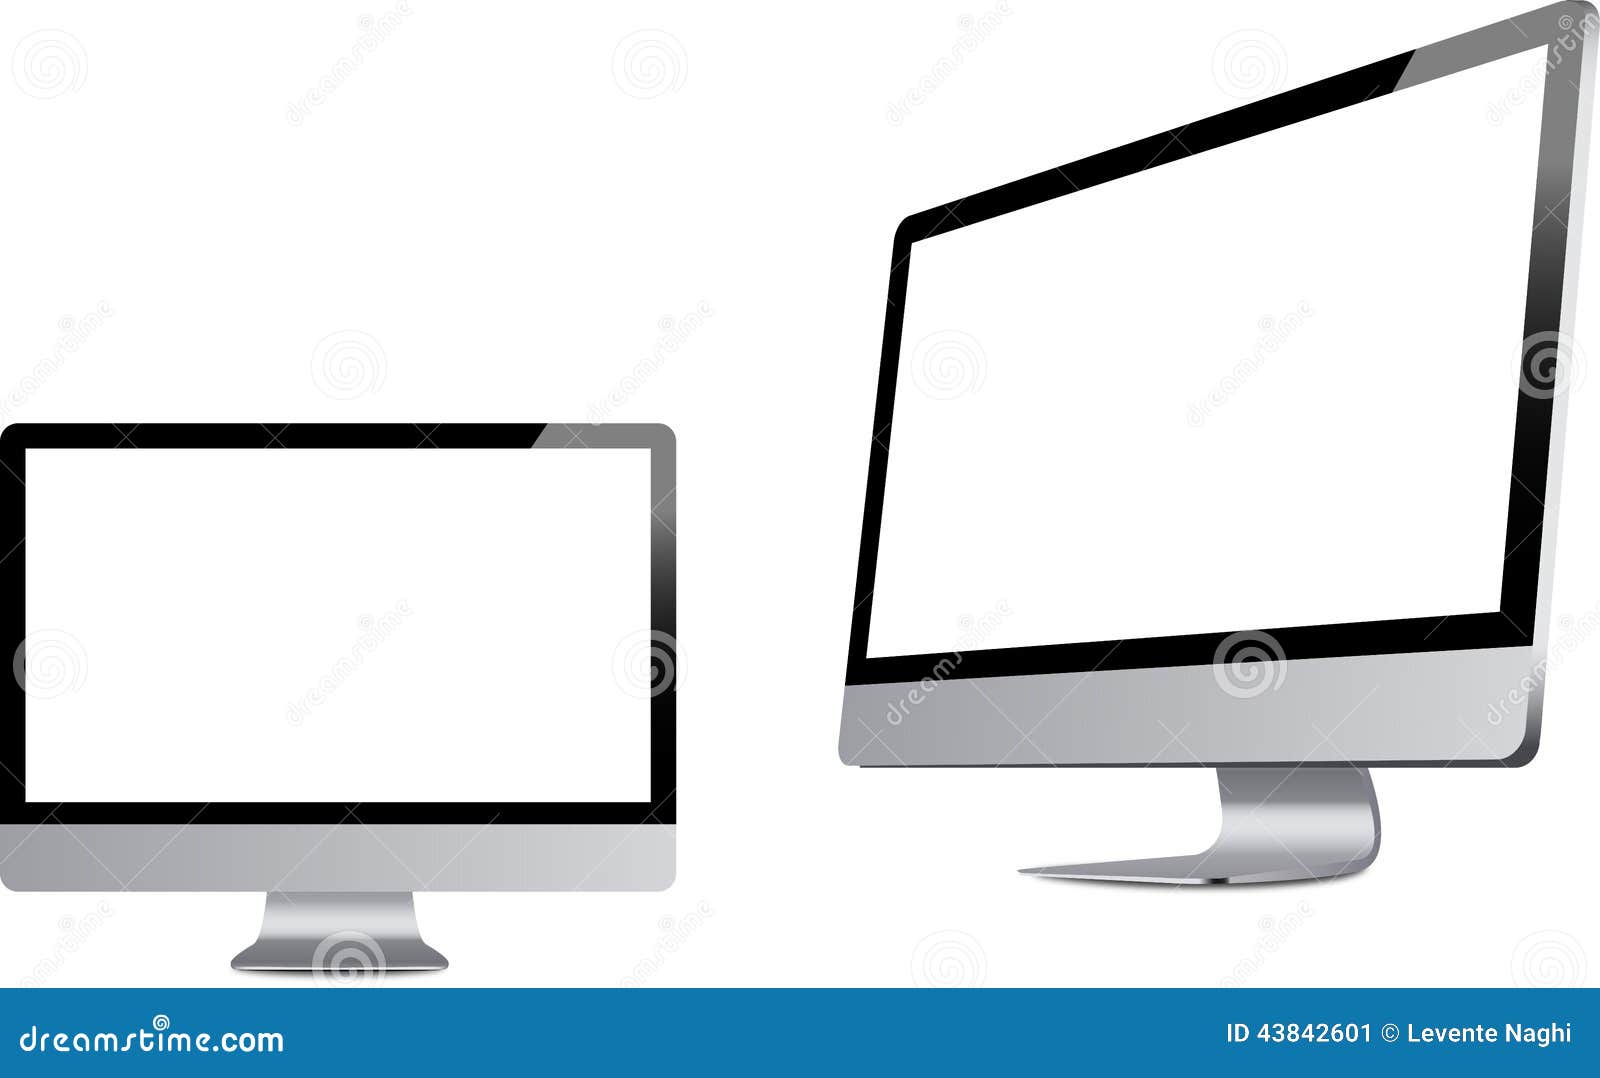 clipart for imac - photo #40